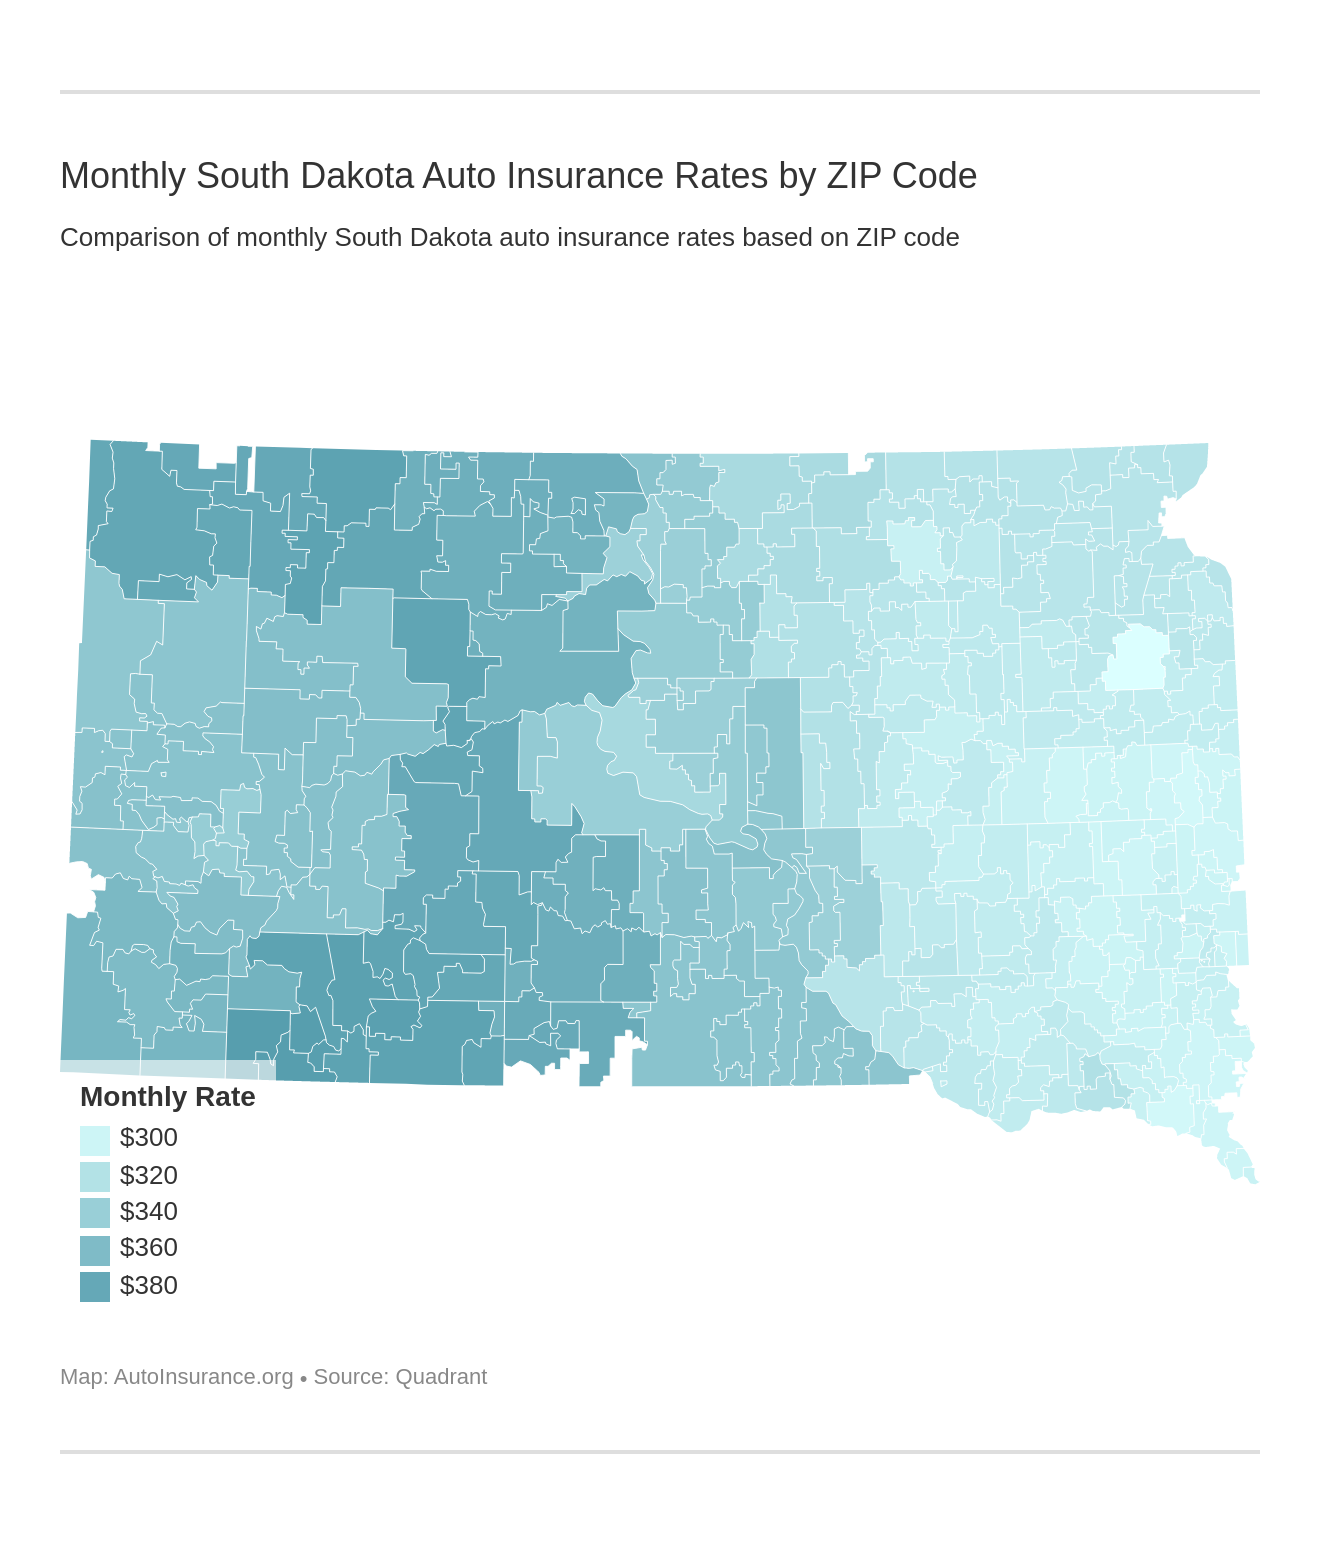 Monthly South Dakota Auto Insurance Rates by ZIP Code